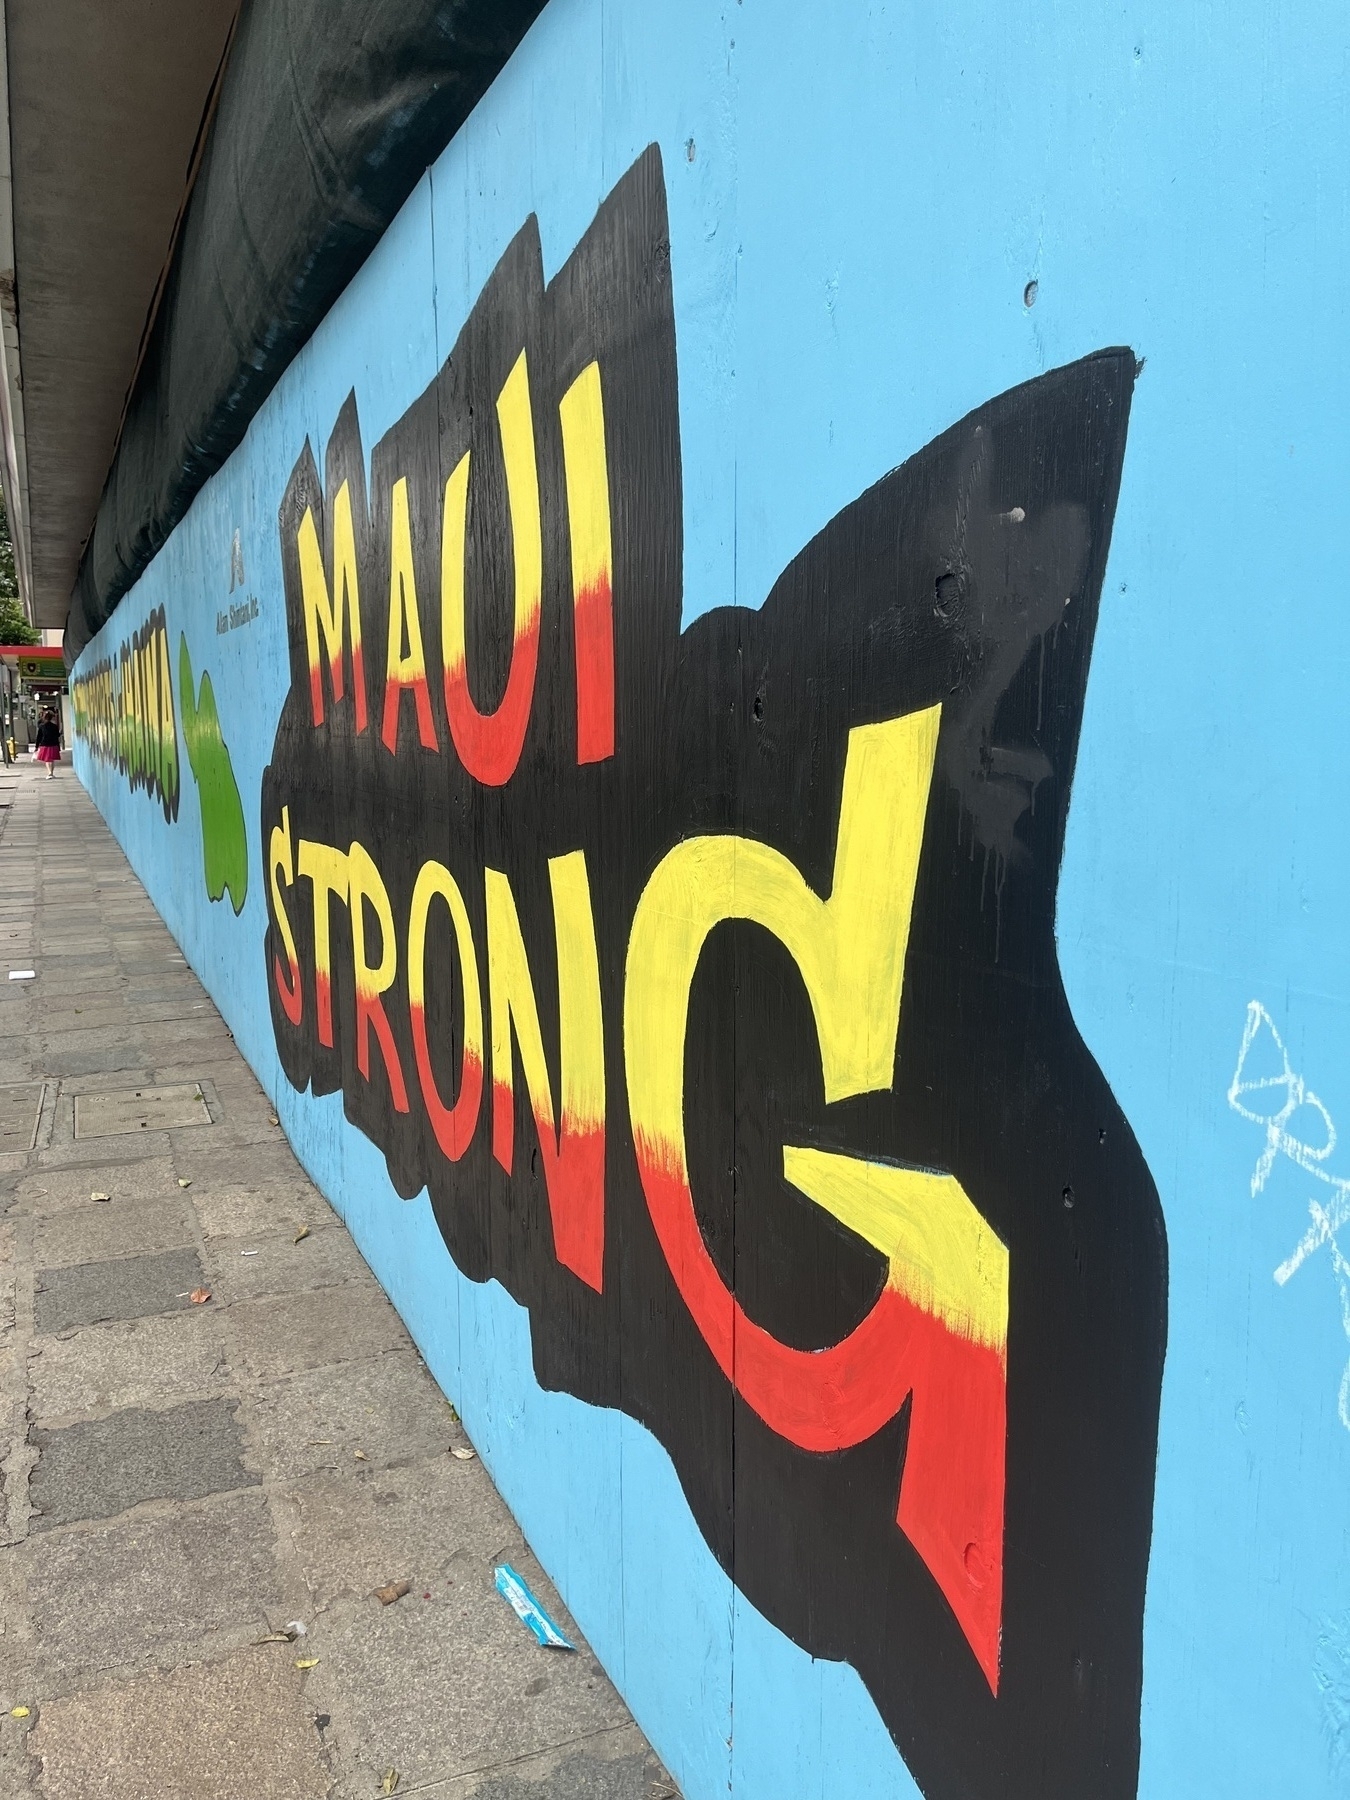 A big board across the front of a building, painted blue with the words Maui Strong painted in big letter along with a map of Maui